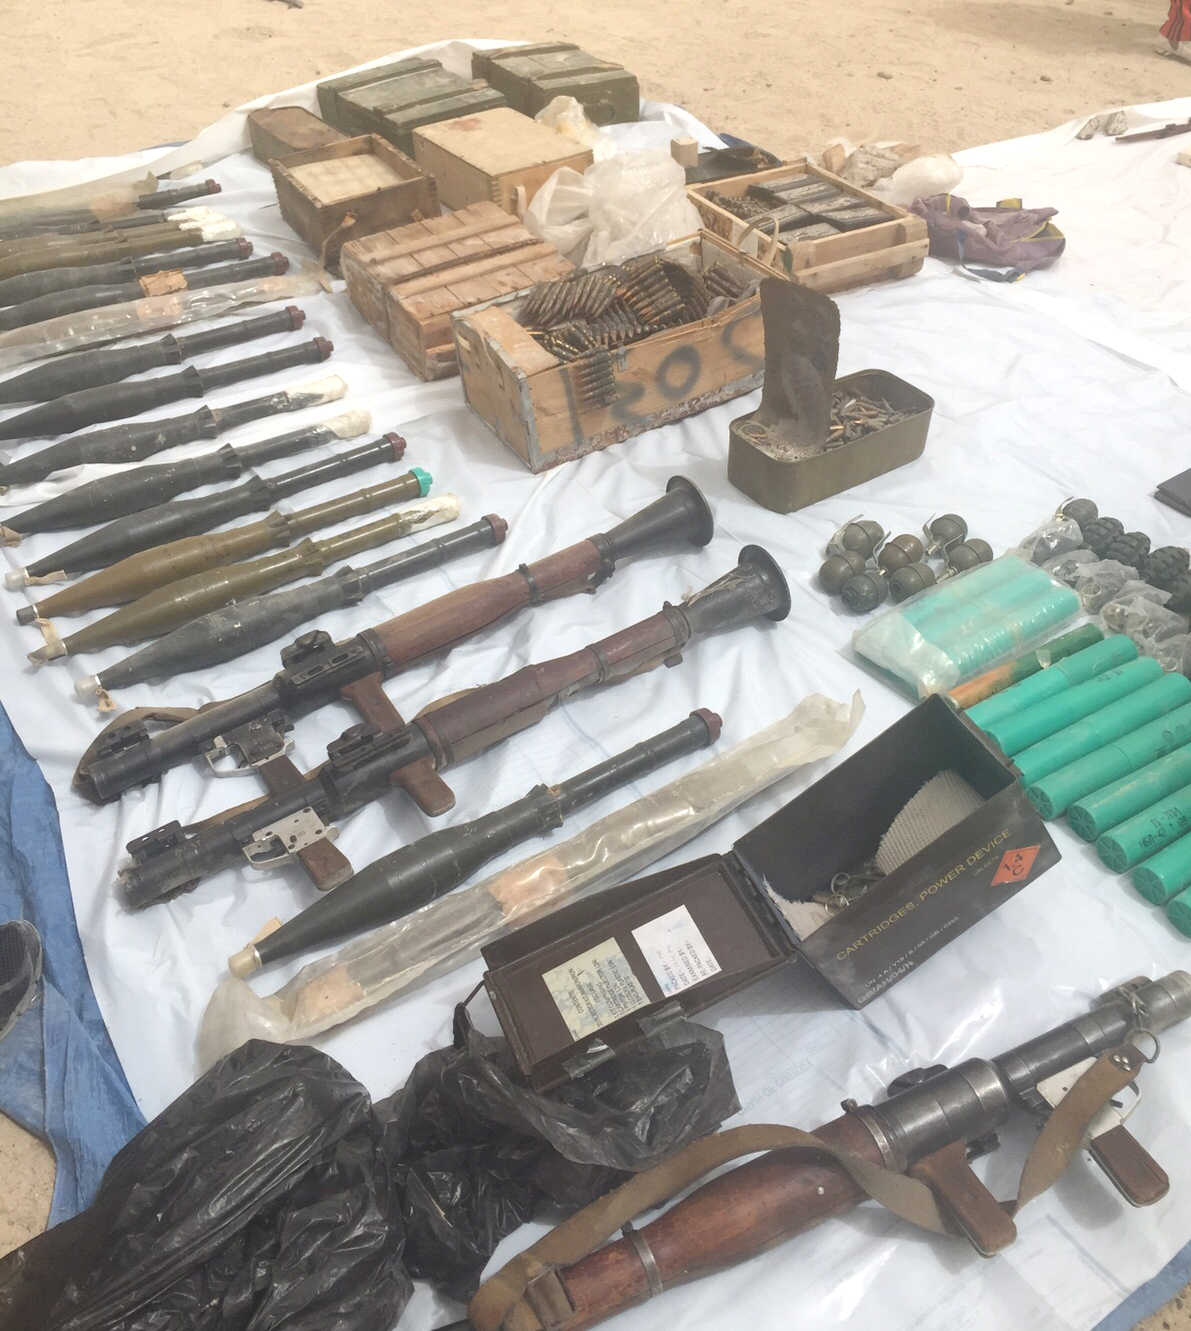 A quantity of weapons and explosives inside a dumpster in Gharnata area